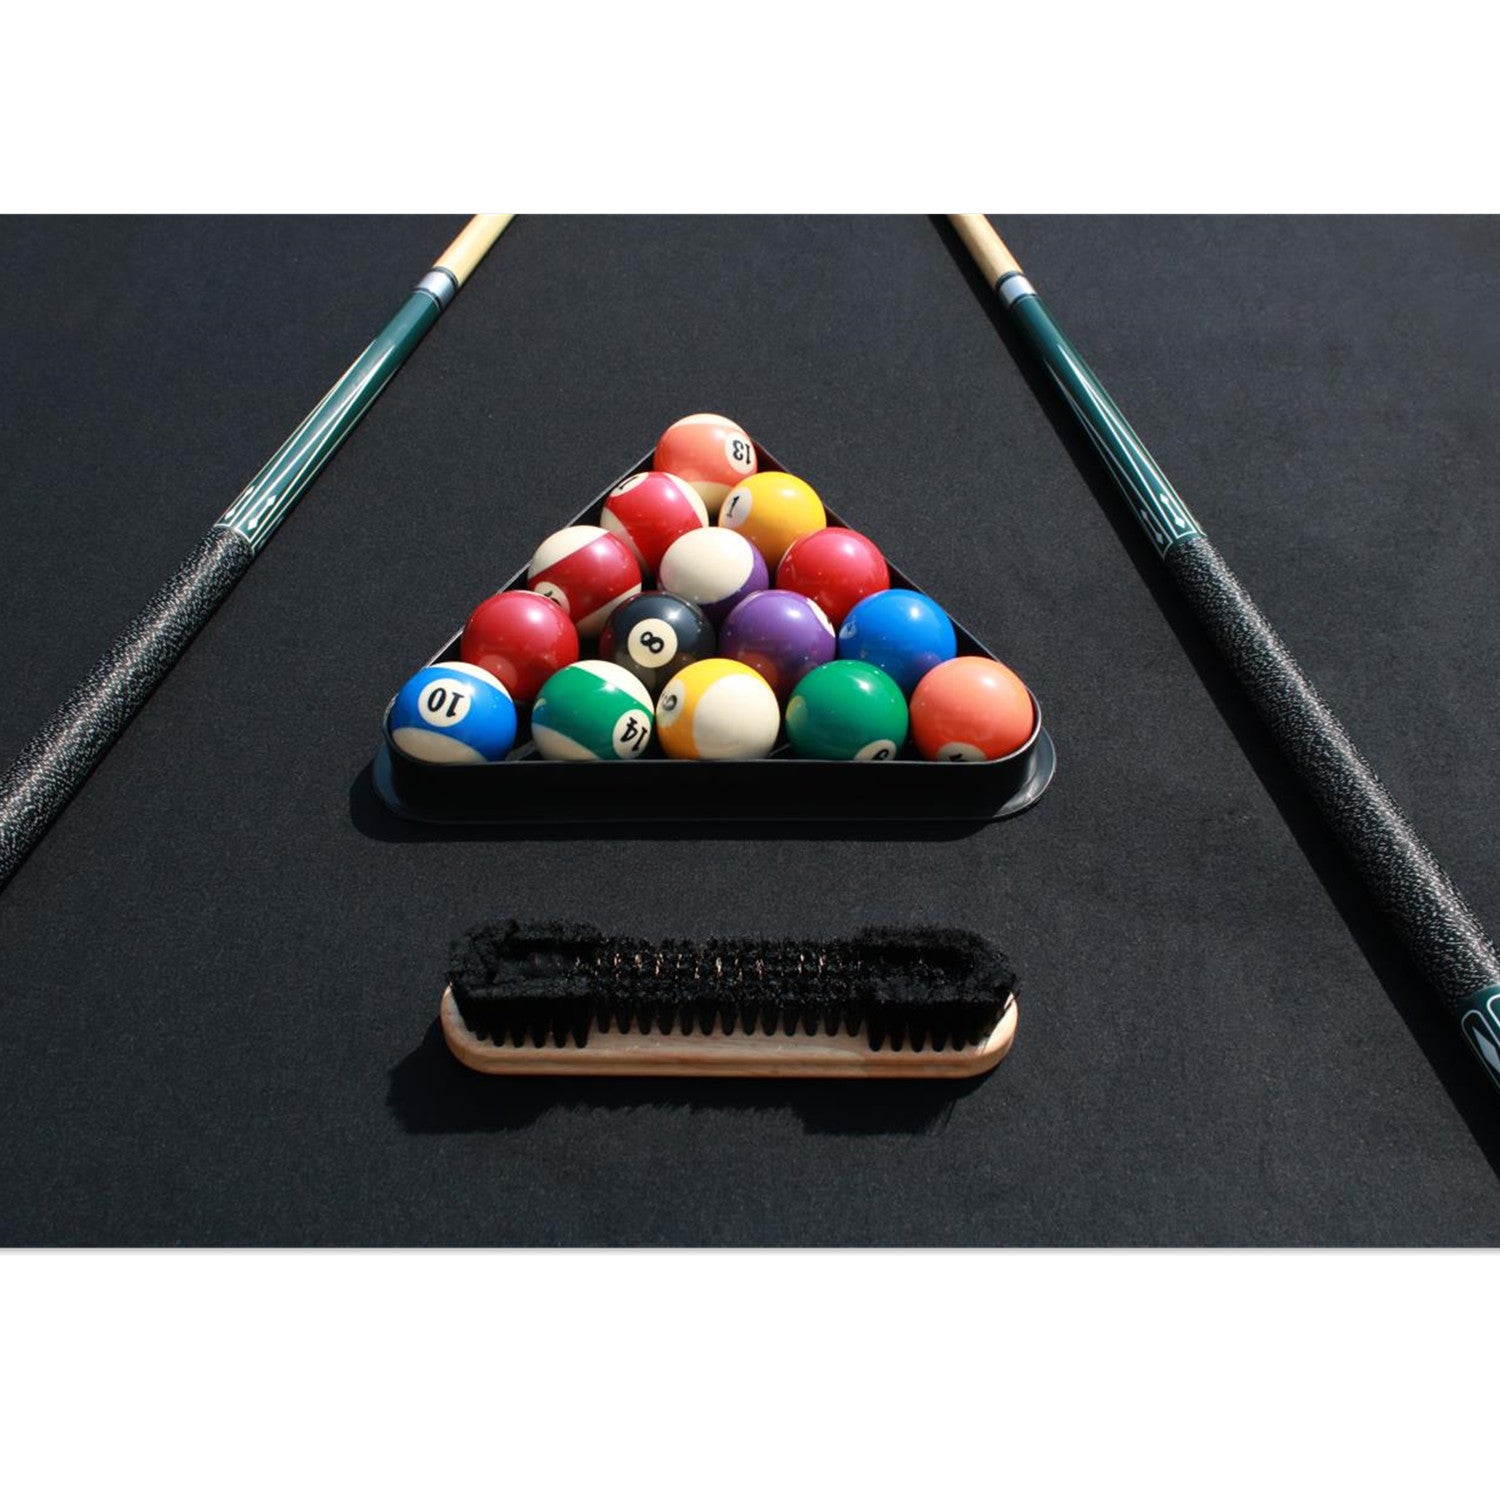 Sidra Dining Pool Table - Slate 3IN1 7FT